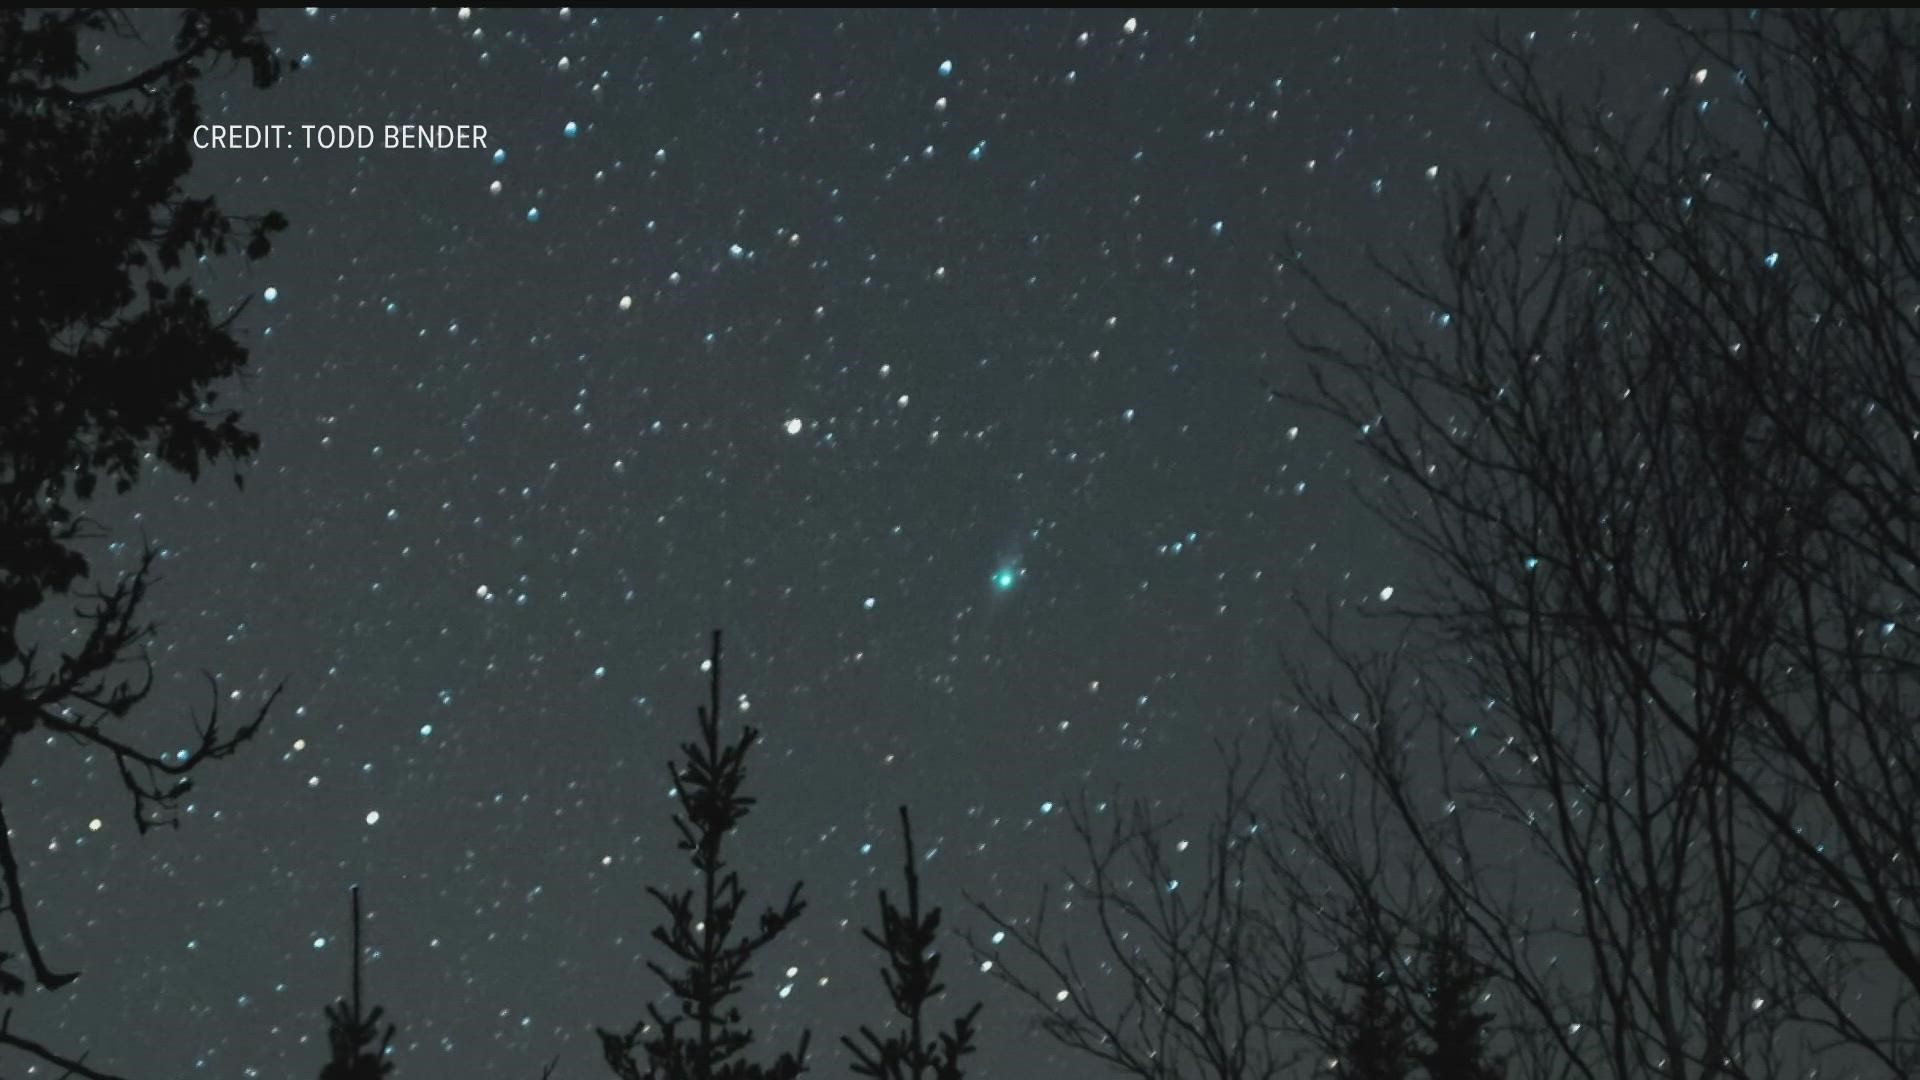 Look between the Big and Little Dippers in the northern sky to spot the comet.